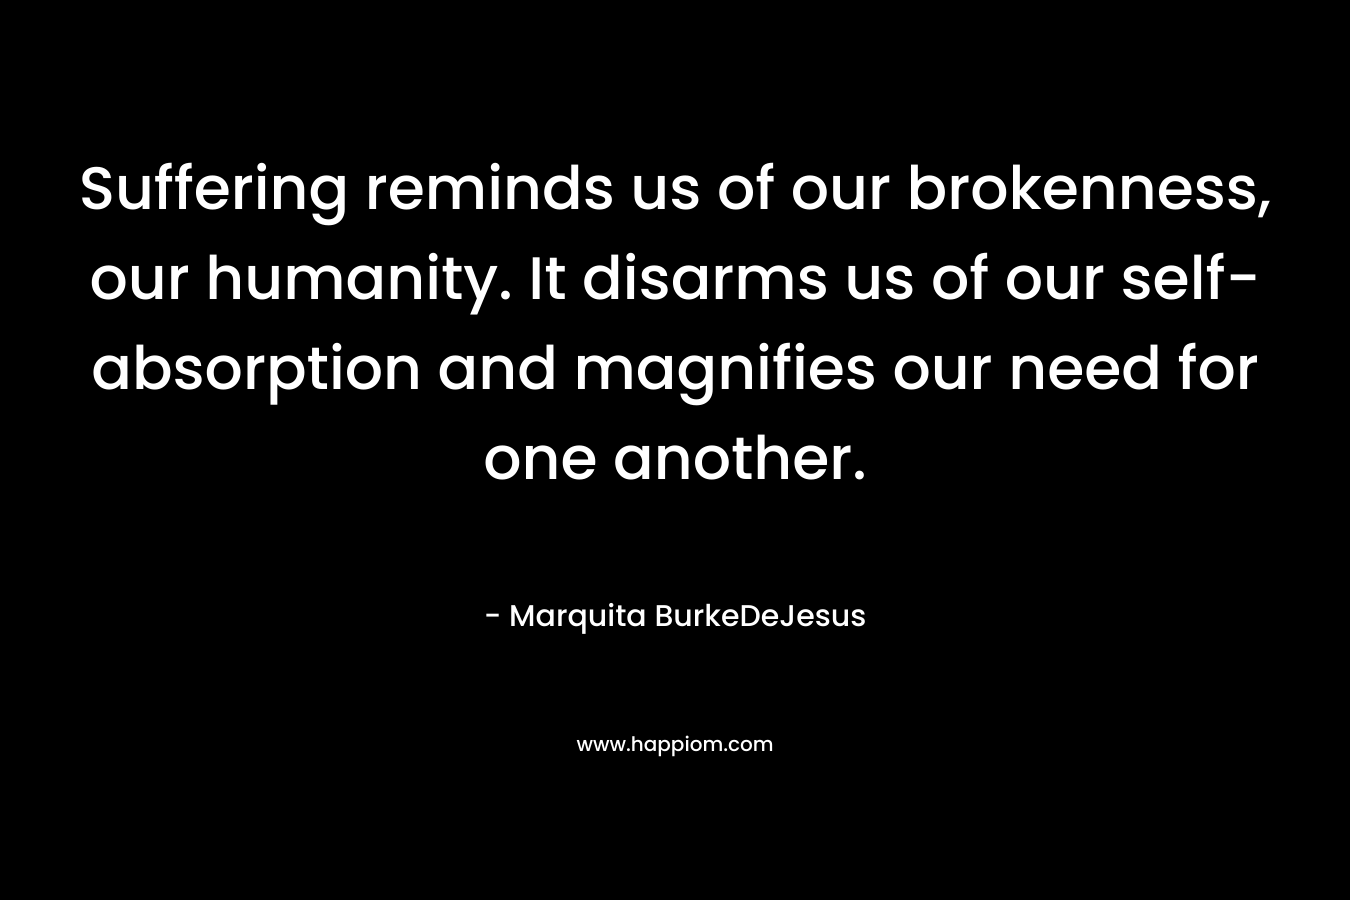 Suffering reminds us of our brokenness, our humanity. It disarms us of our self-absorption and magnifies our need for one another.